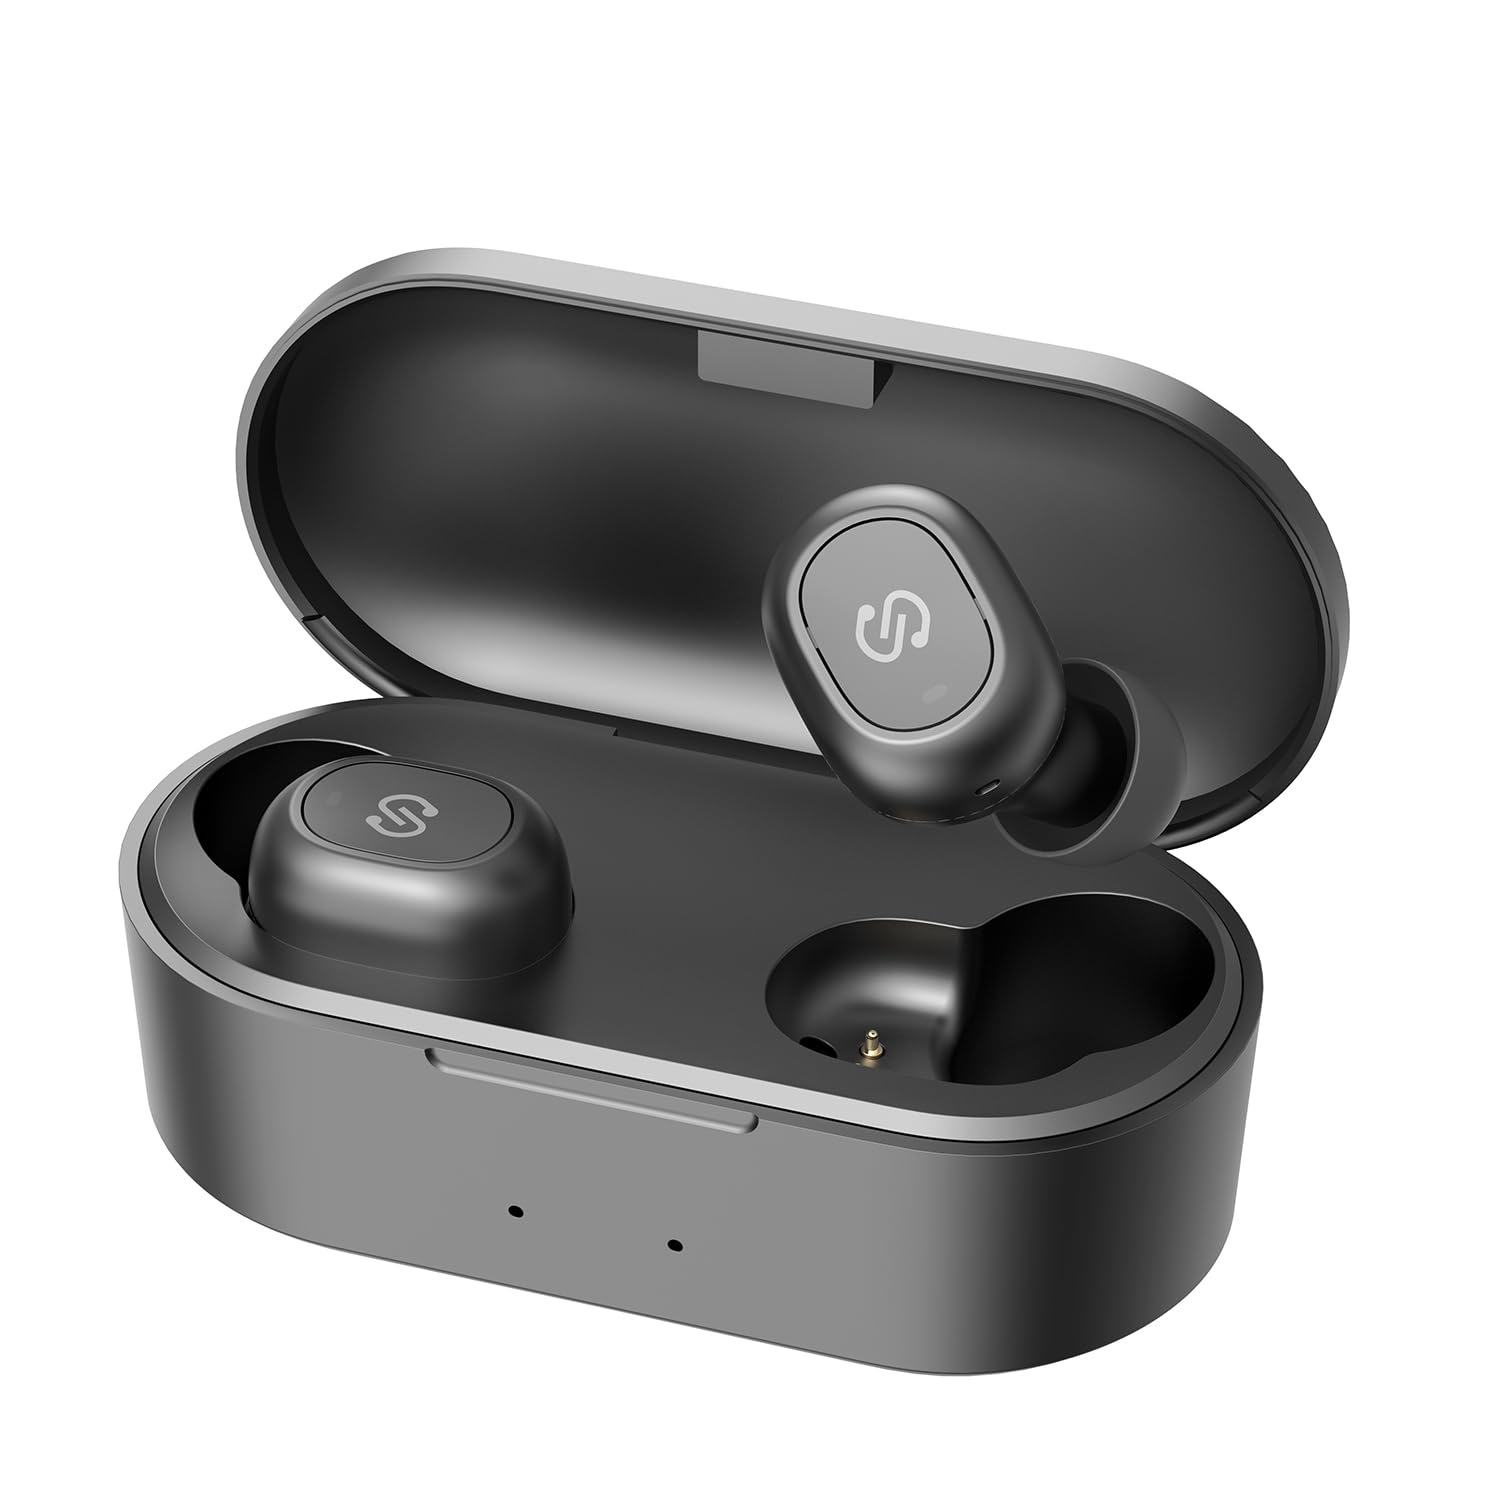 pairing-guide-for-soundpeats-wireless-earbuds